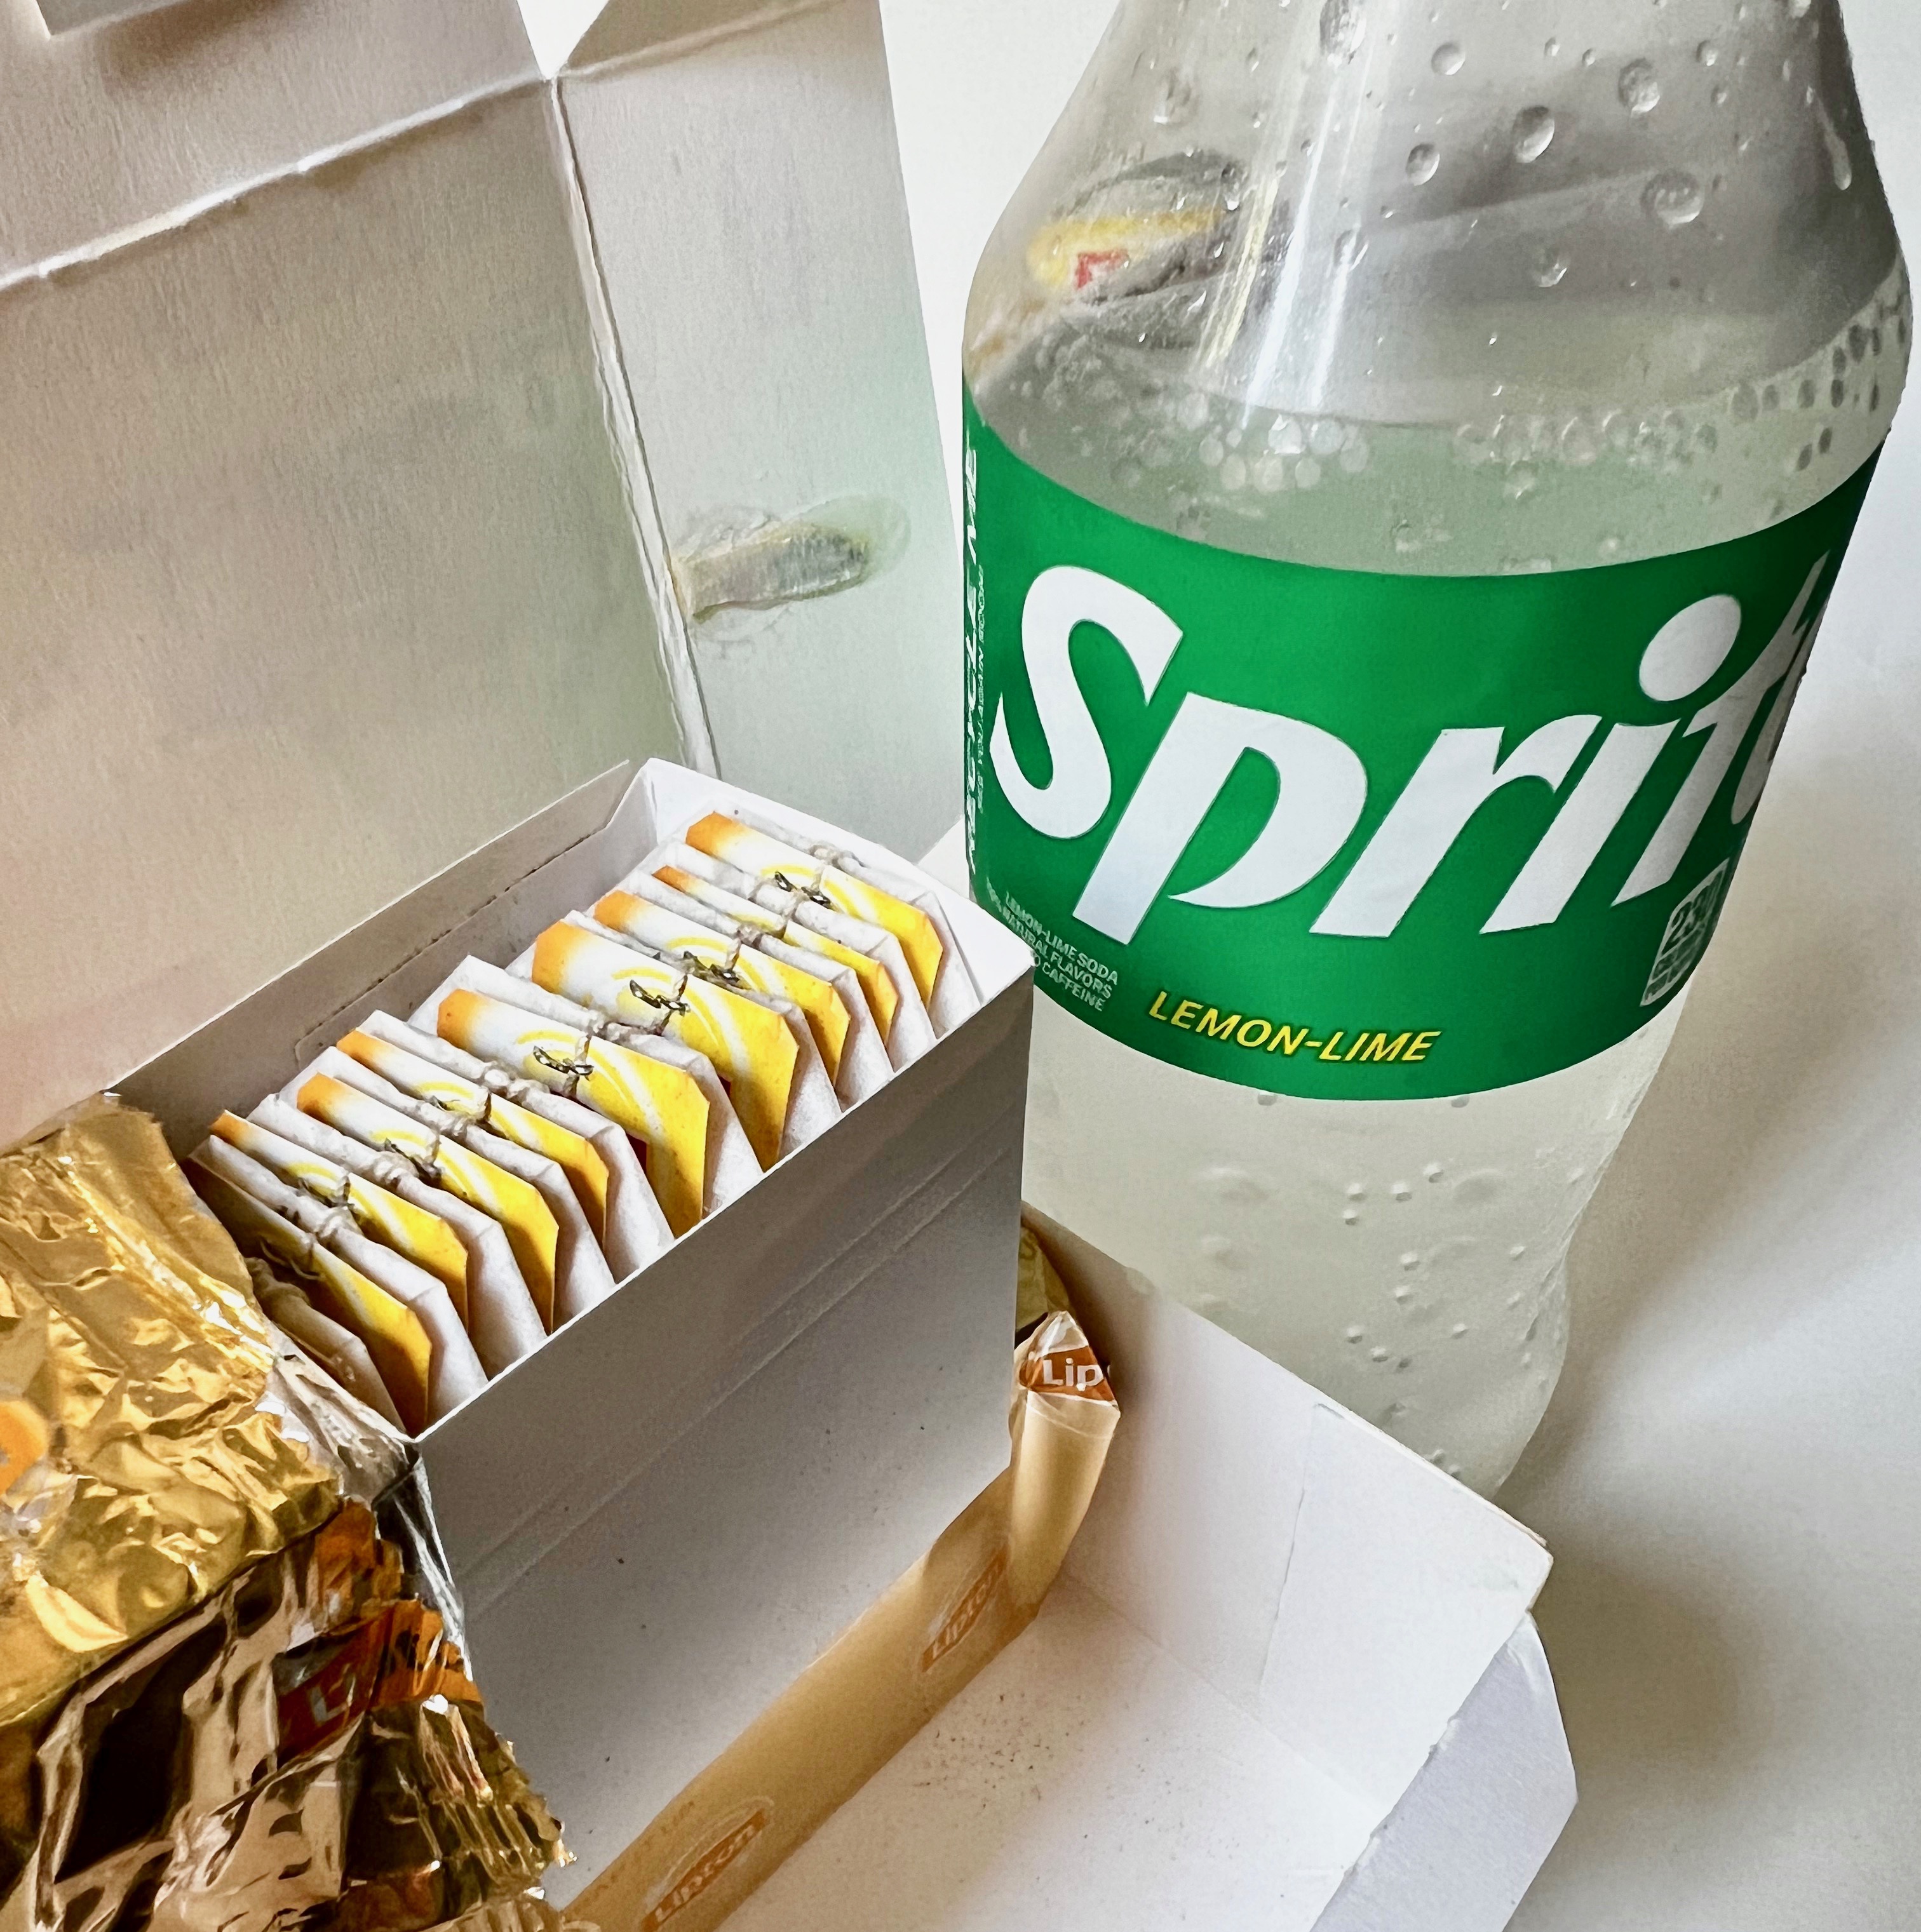 People Are Putting Lipton Tea Bags in Sprite: Here's My Review